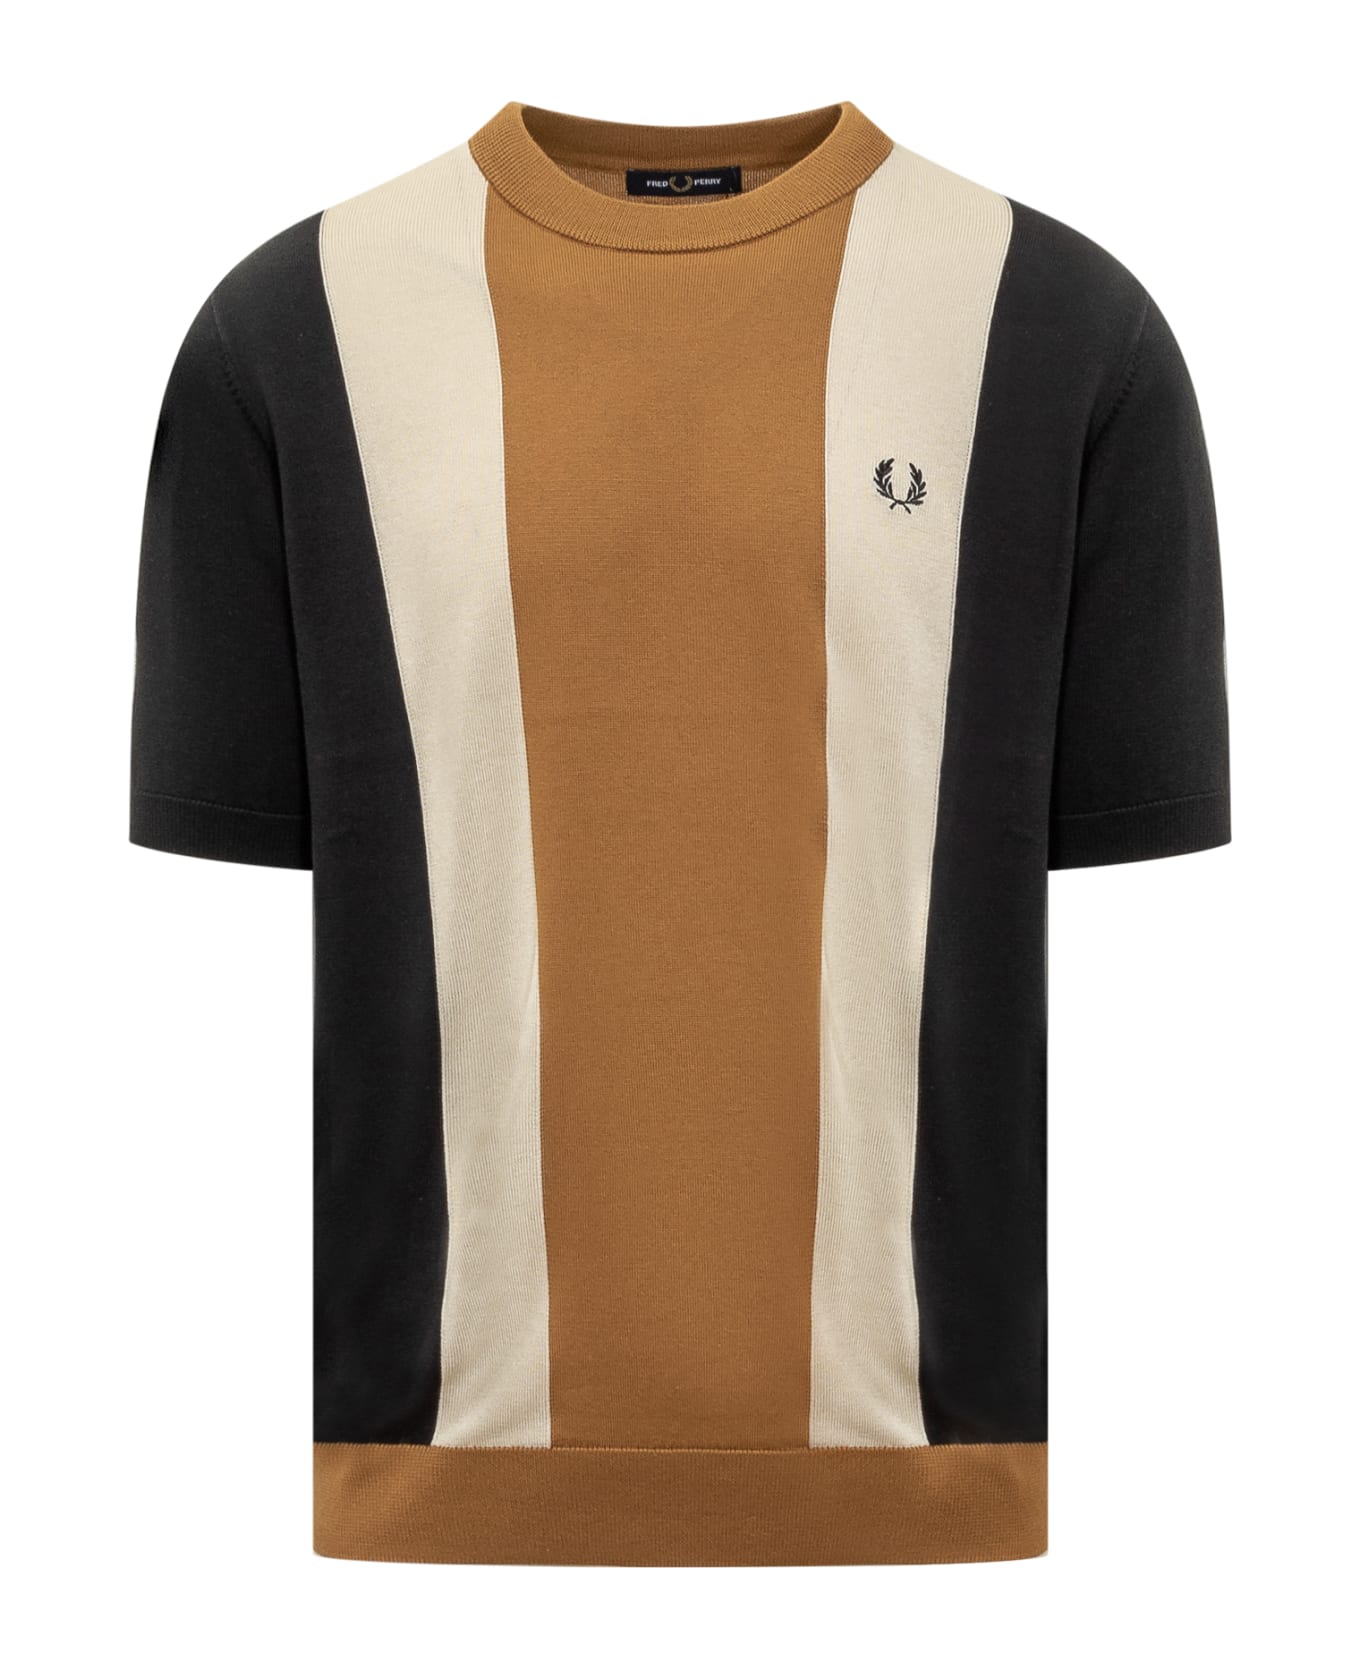 Fred Perry Striped Knit T-shirt. - RIGATO